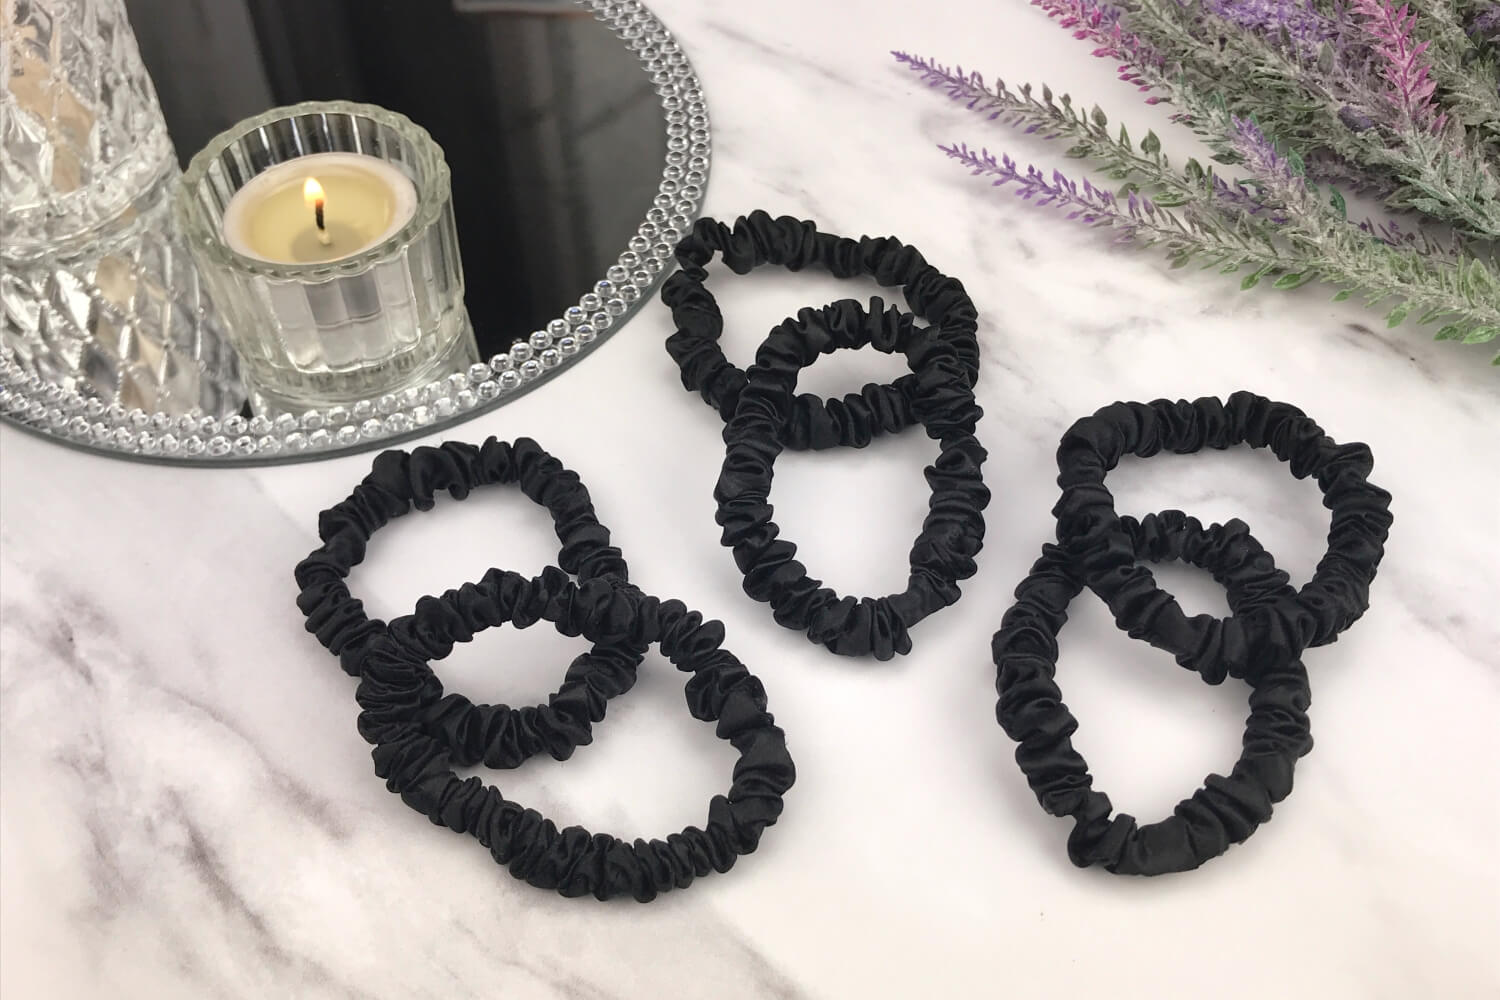 Celestial Silk skinny black silk scrunchies laying on marble counter with lavender plant and a candle in the background